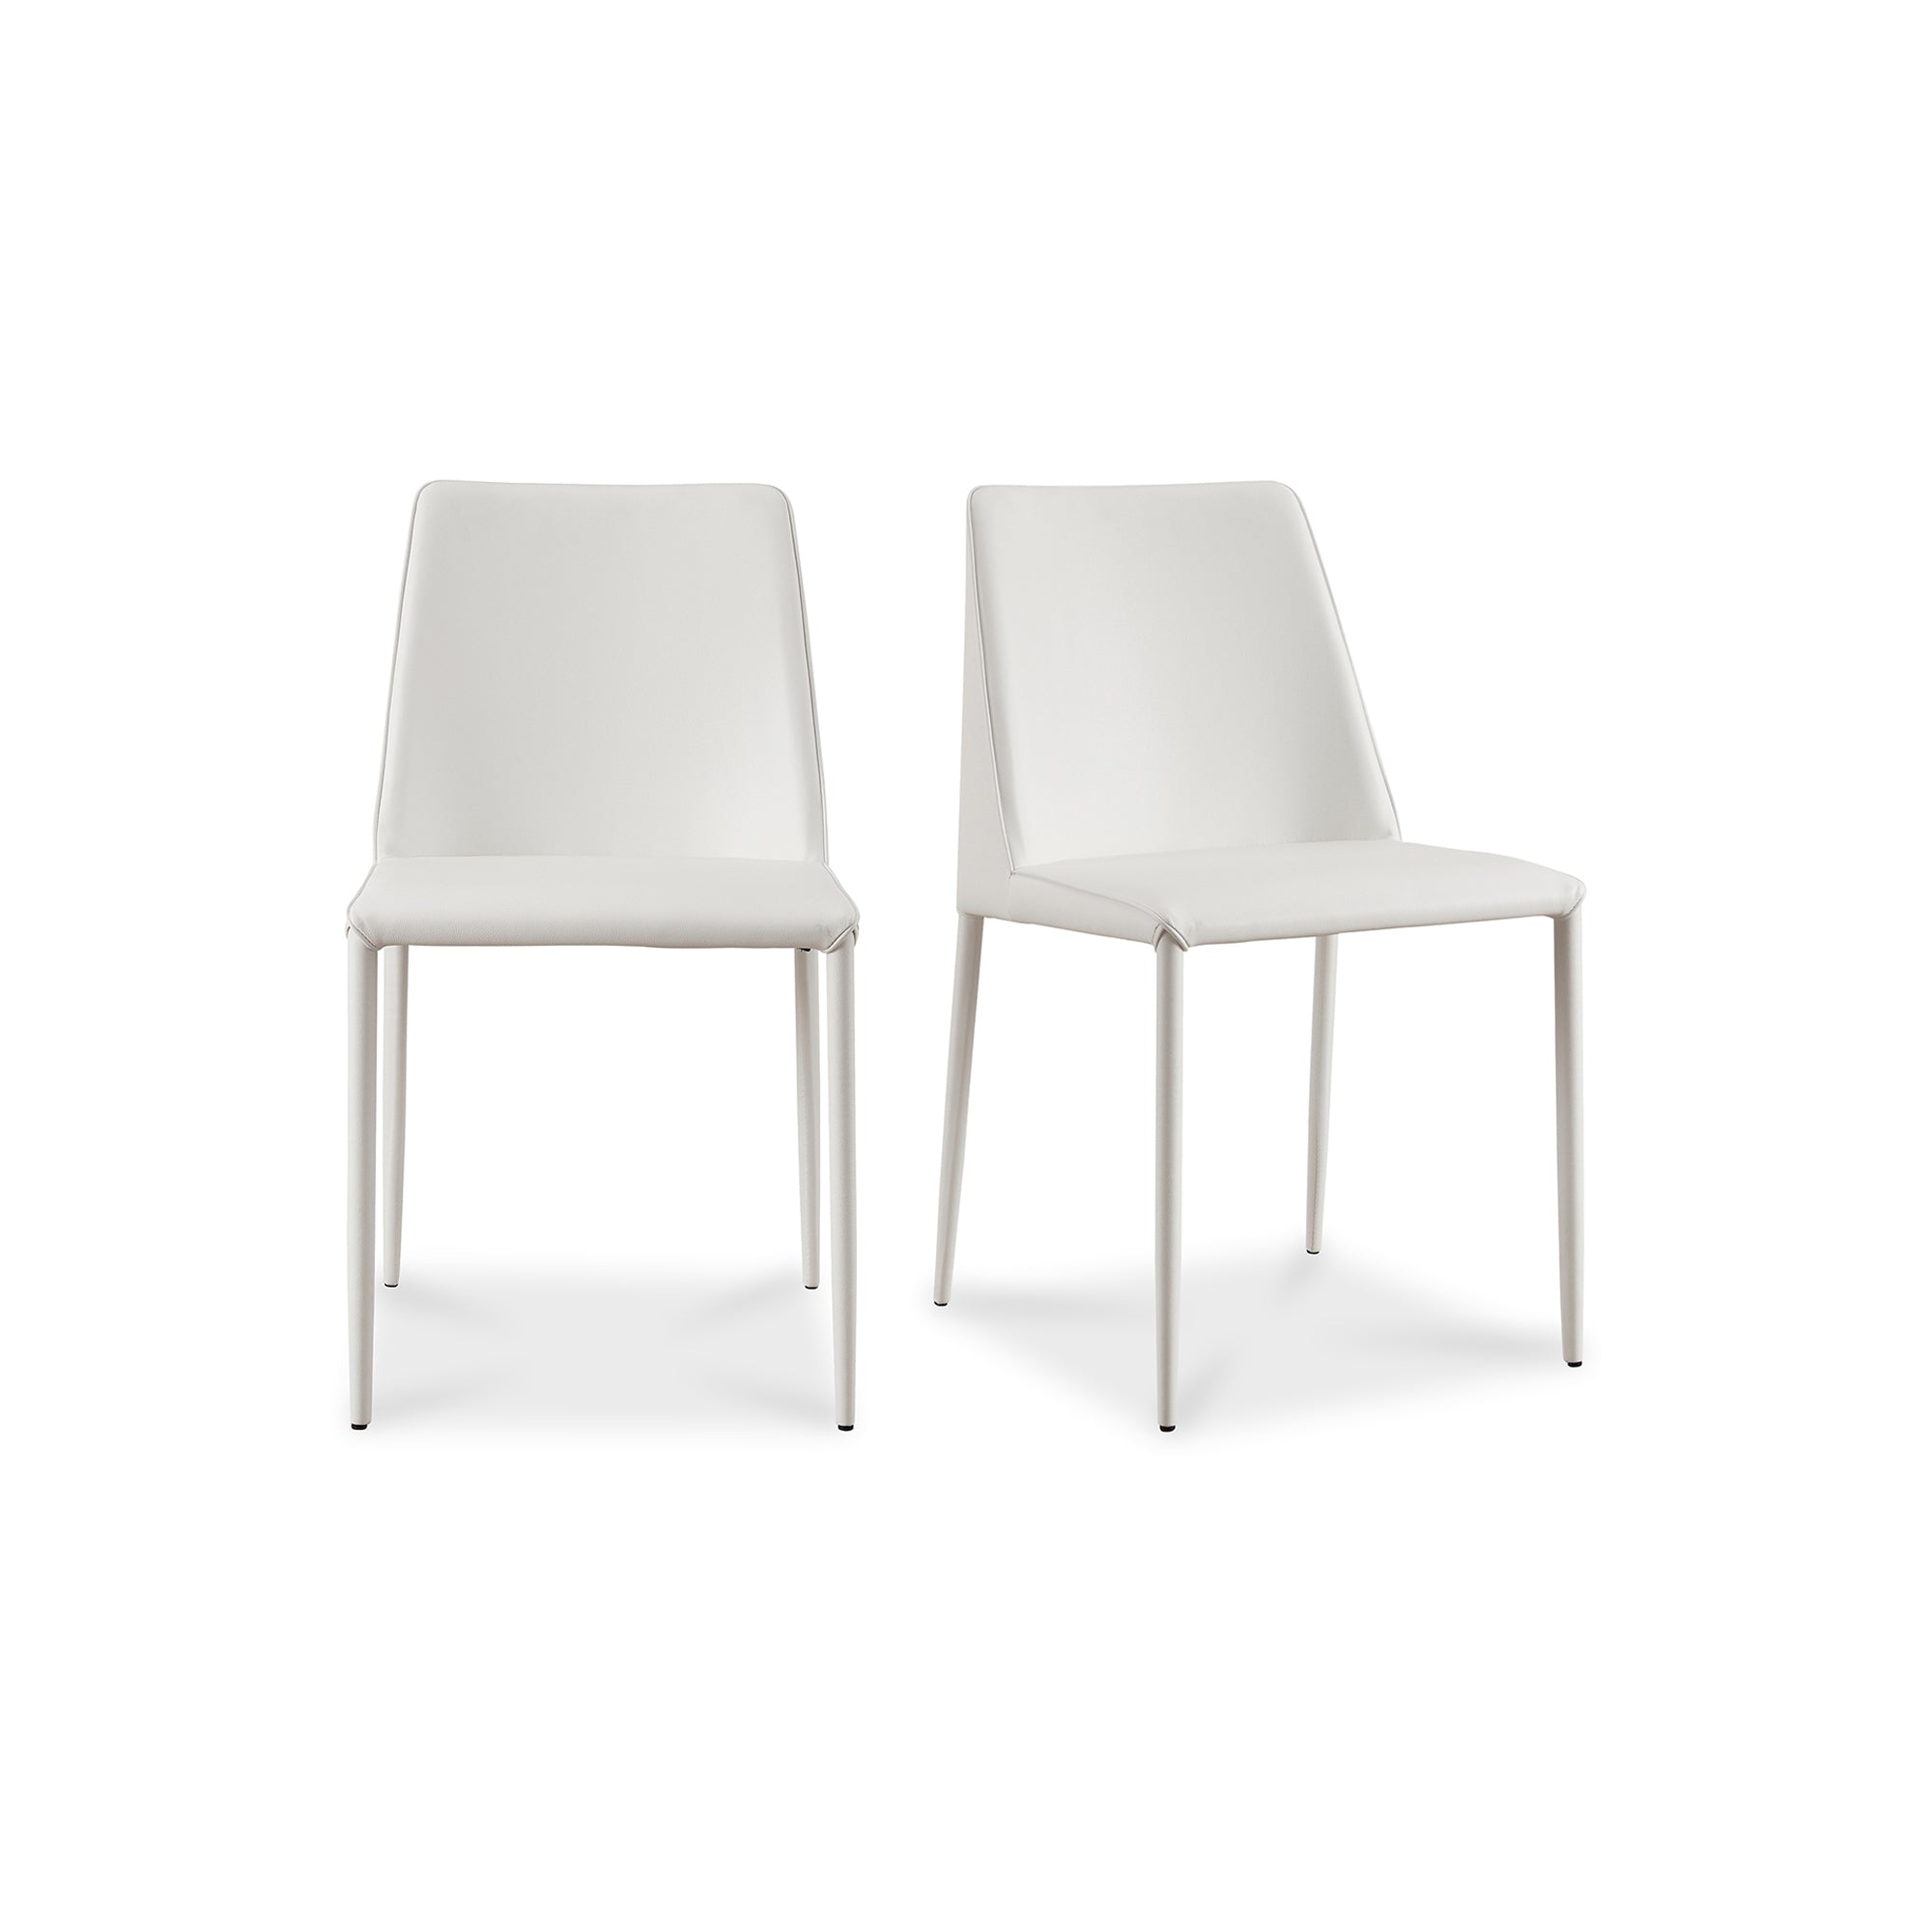 Nora Dining Chair White Vegan Leather - Set Of Two